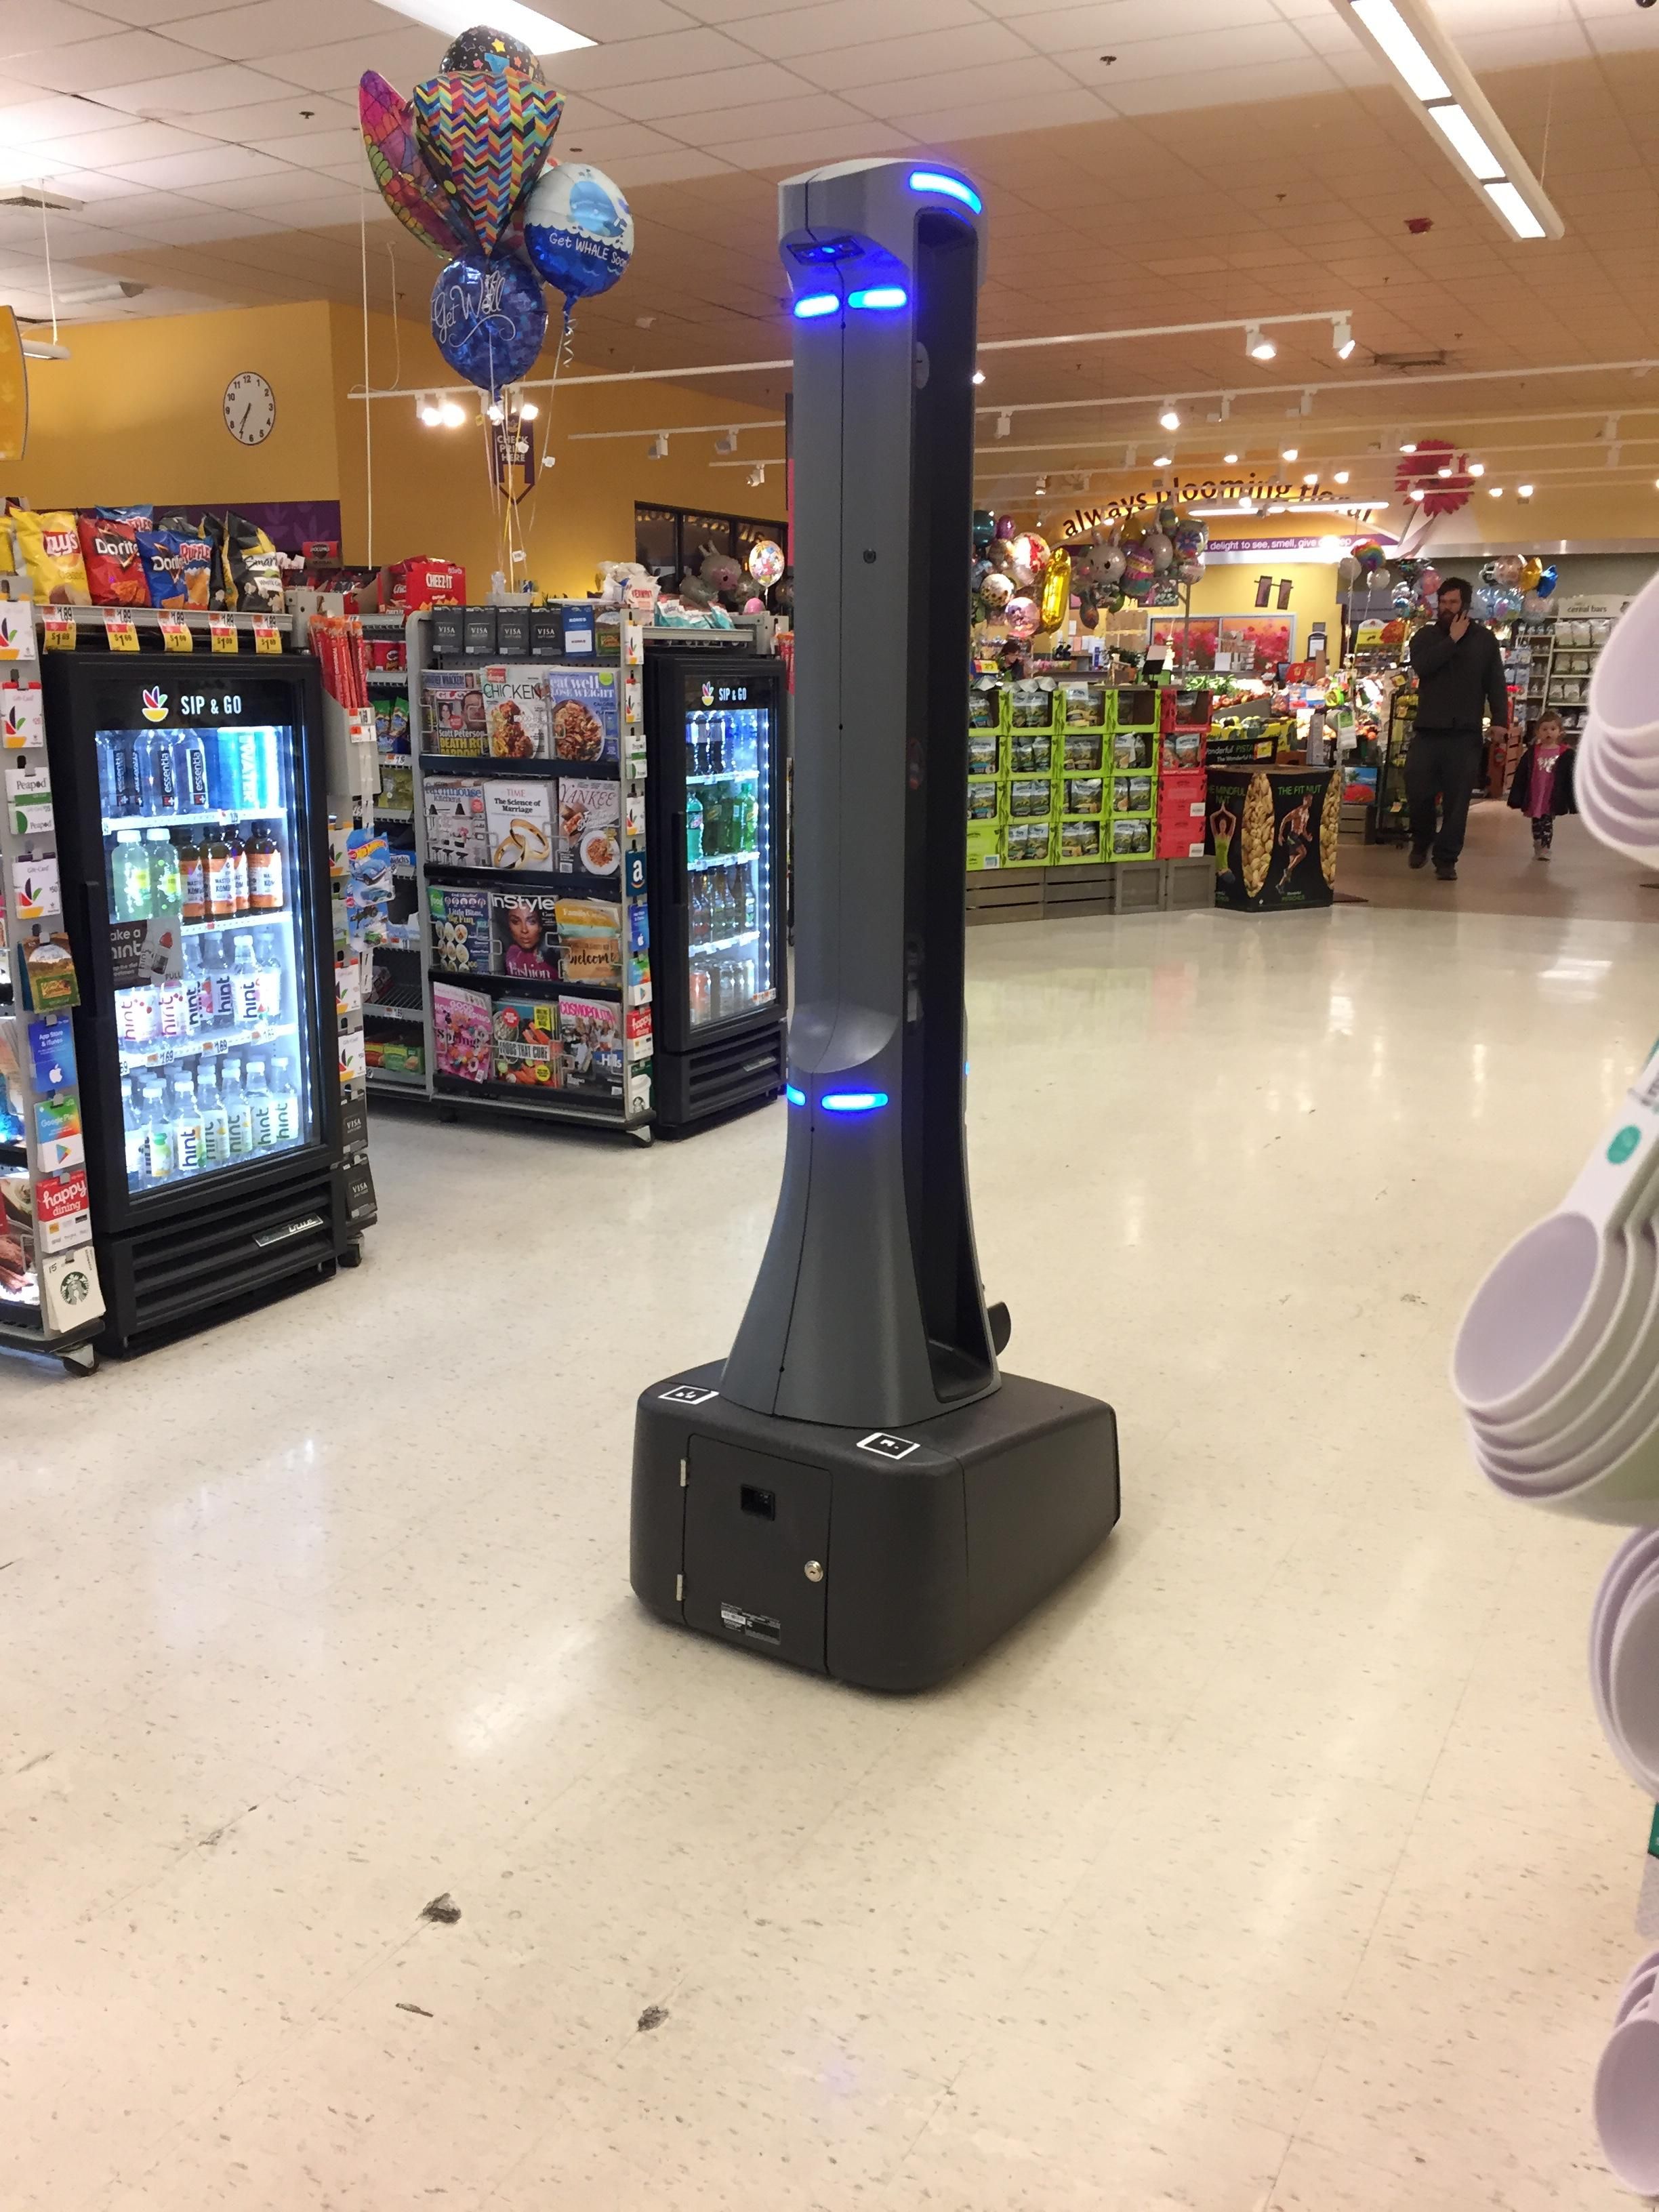 My local supermarket has a giant roomba. "His" name is Marty and he detects spills including the blood it will shed once it becomes sentient.